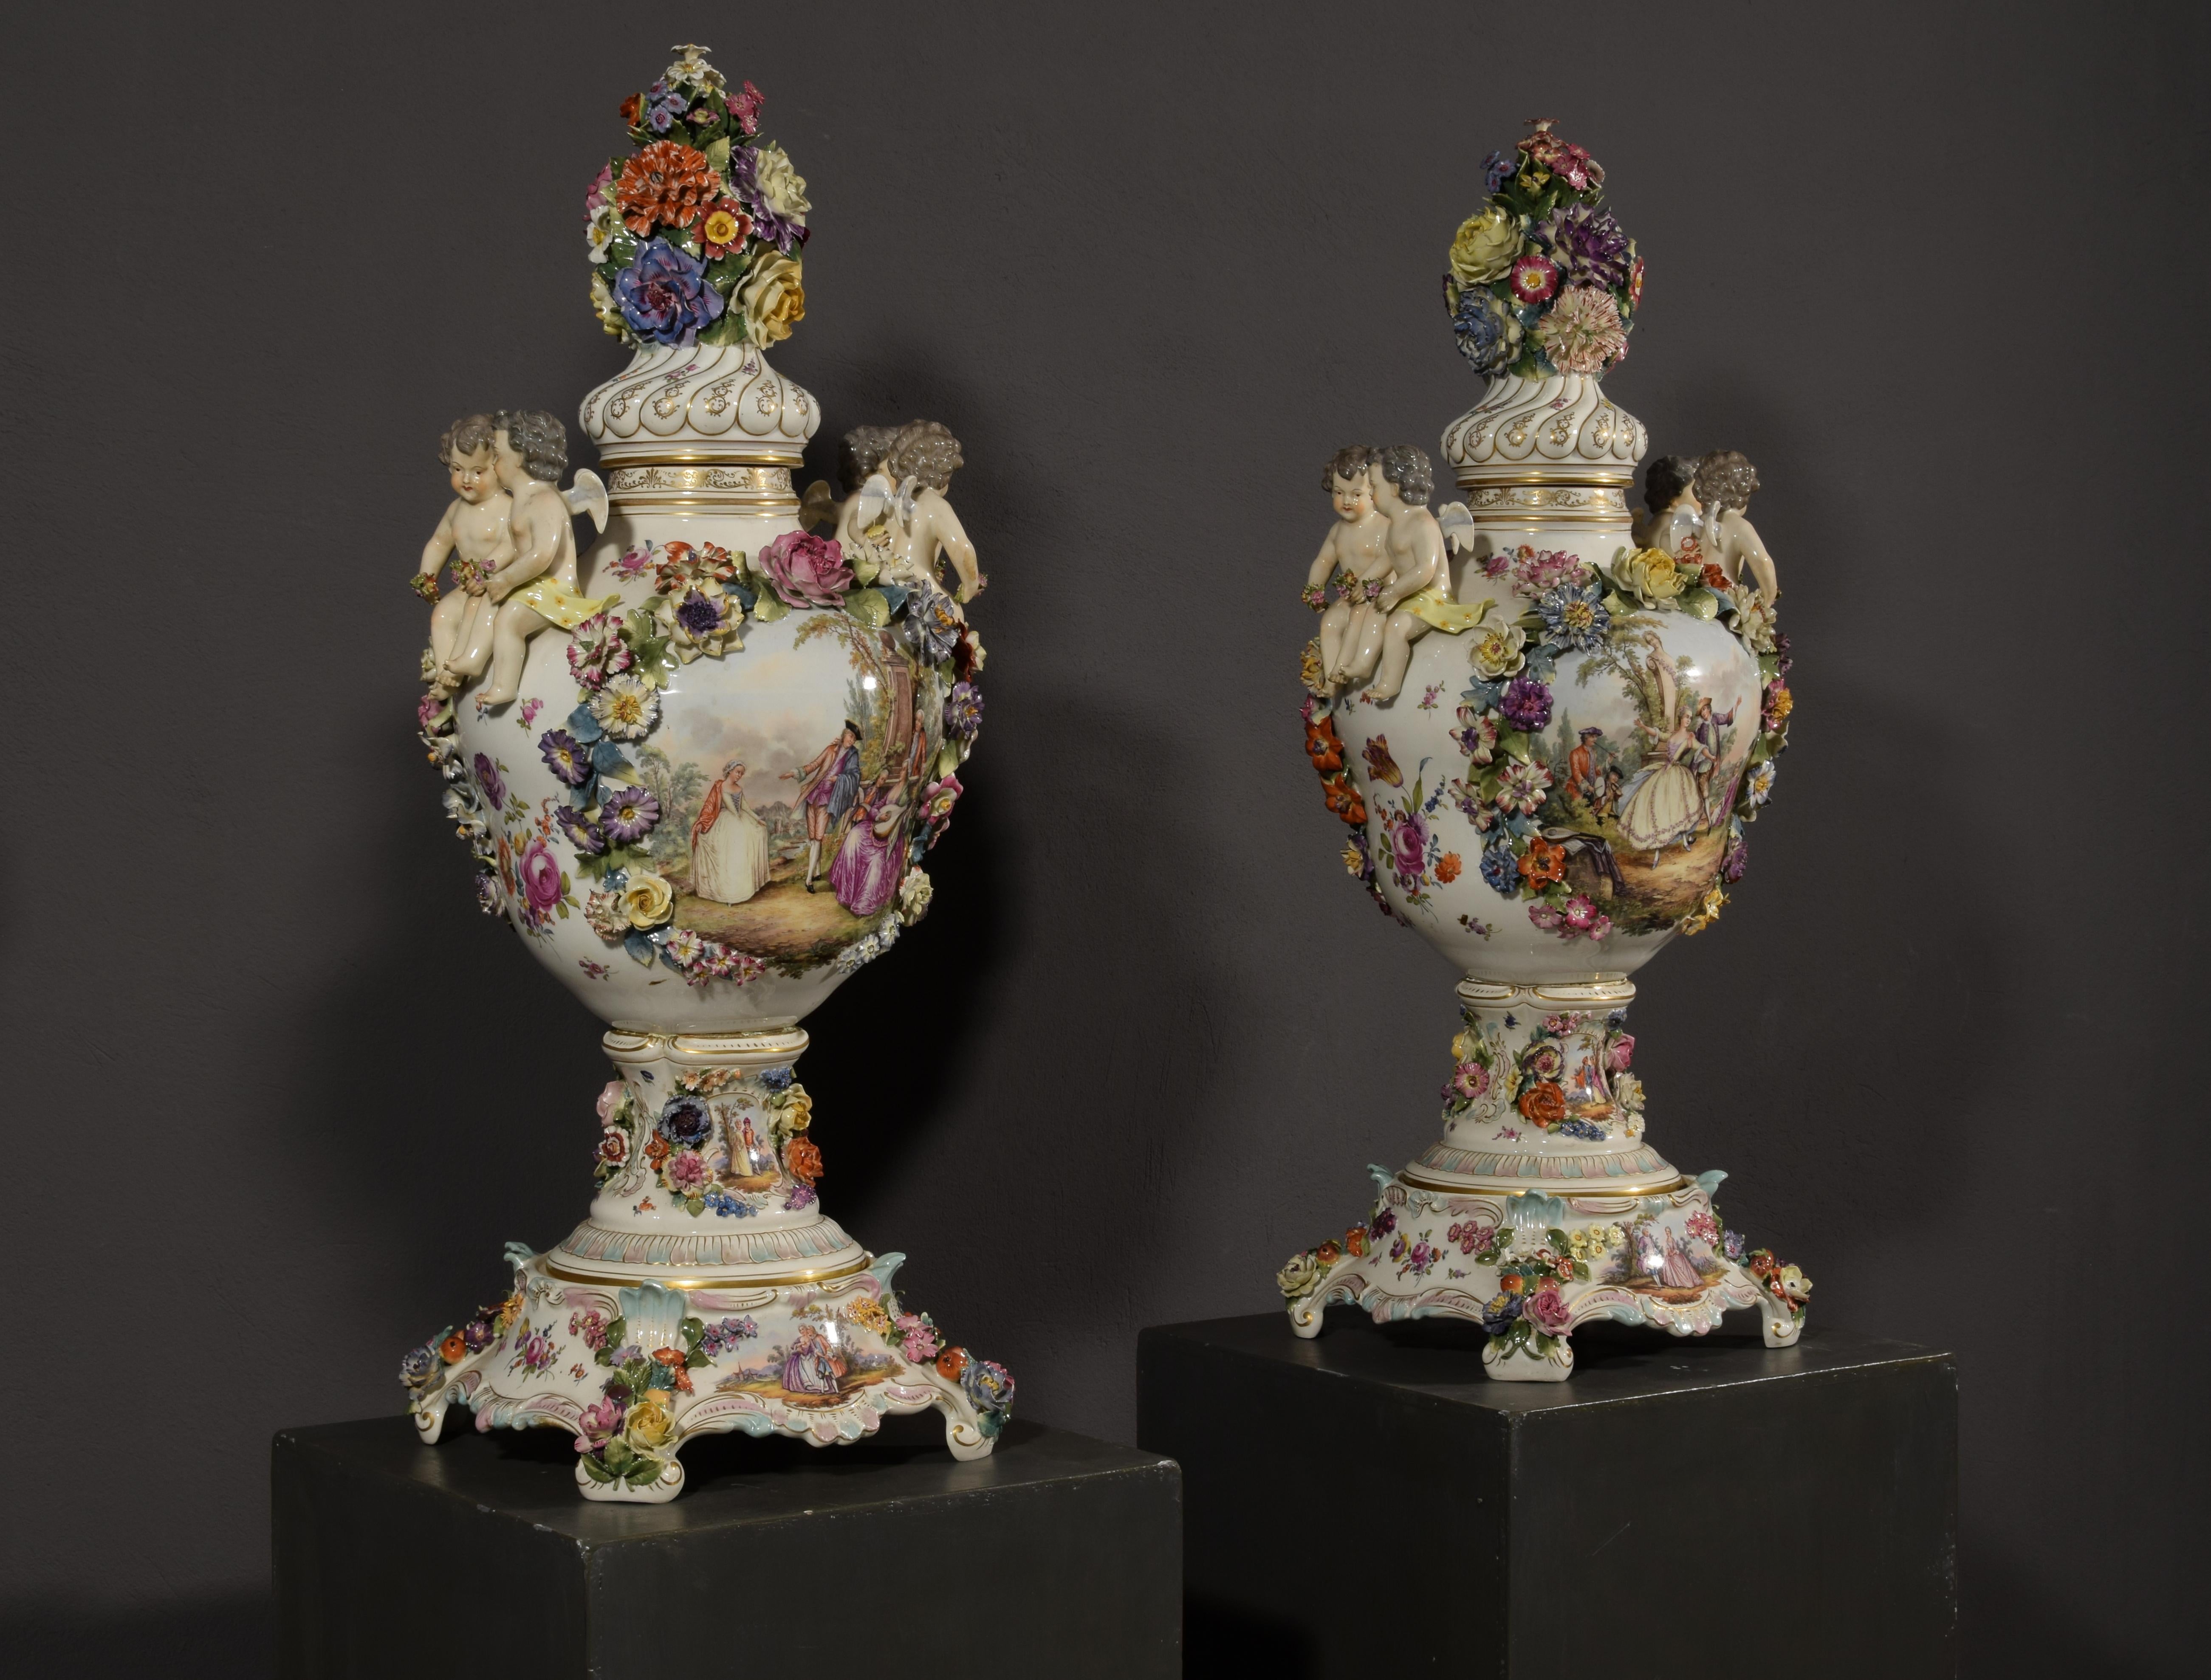 19th Century Pair of German Polychrome Porcelain Vases For Sale 1